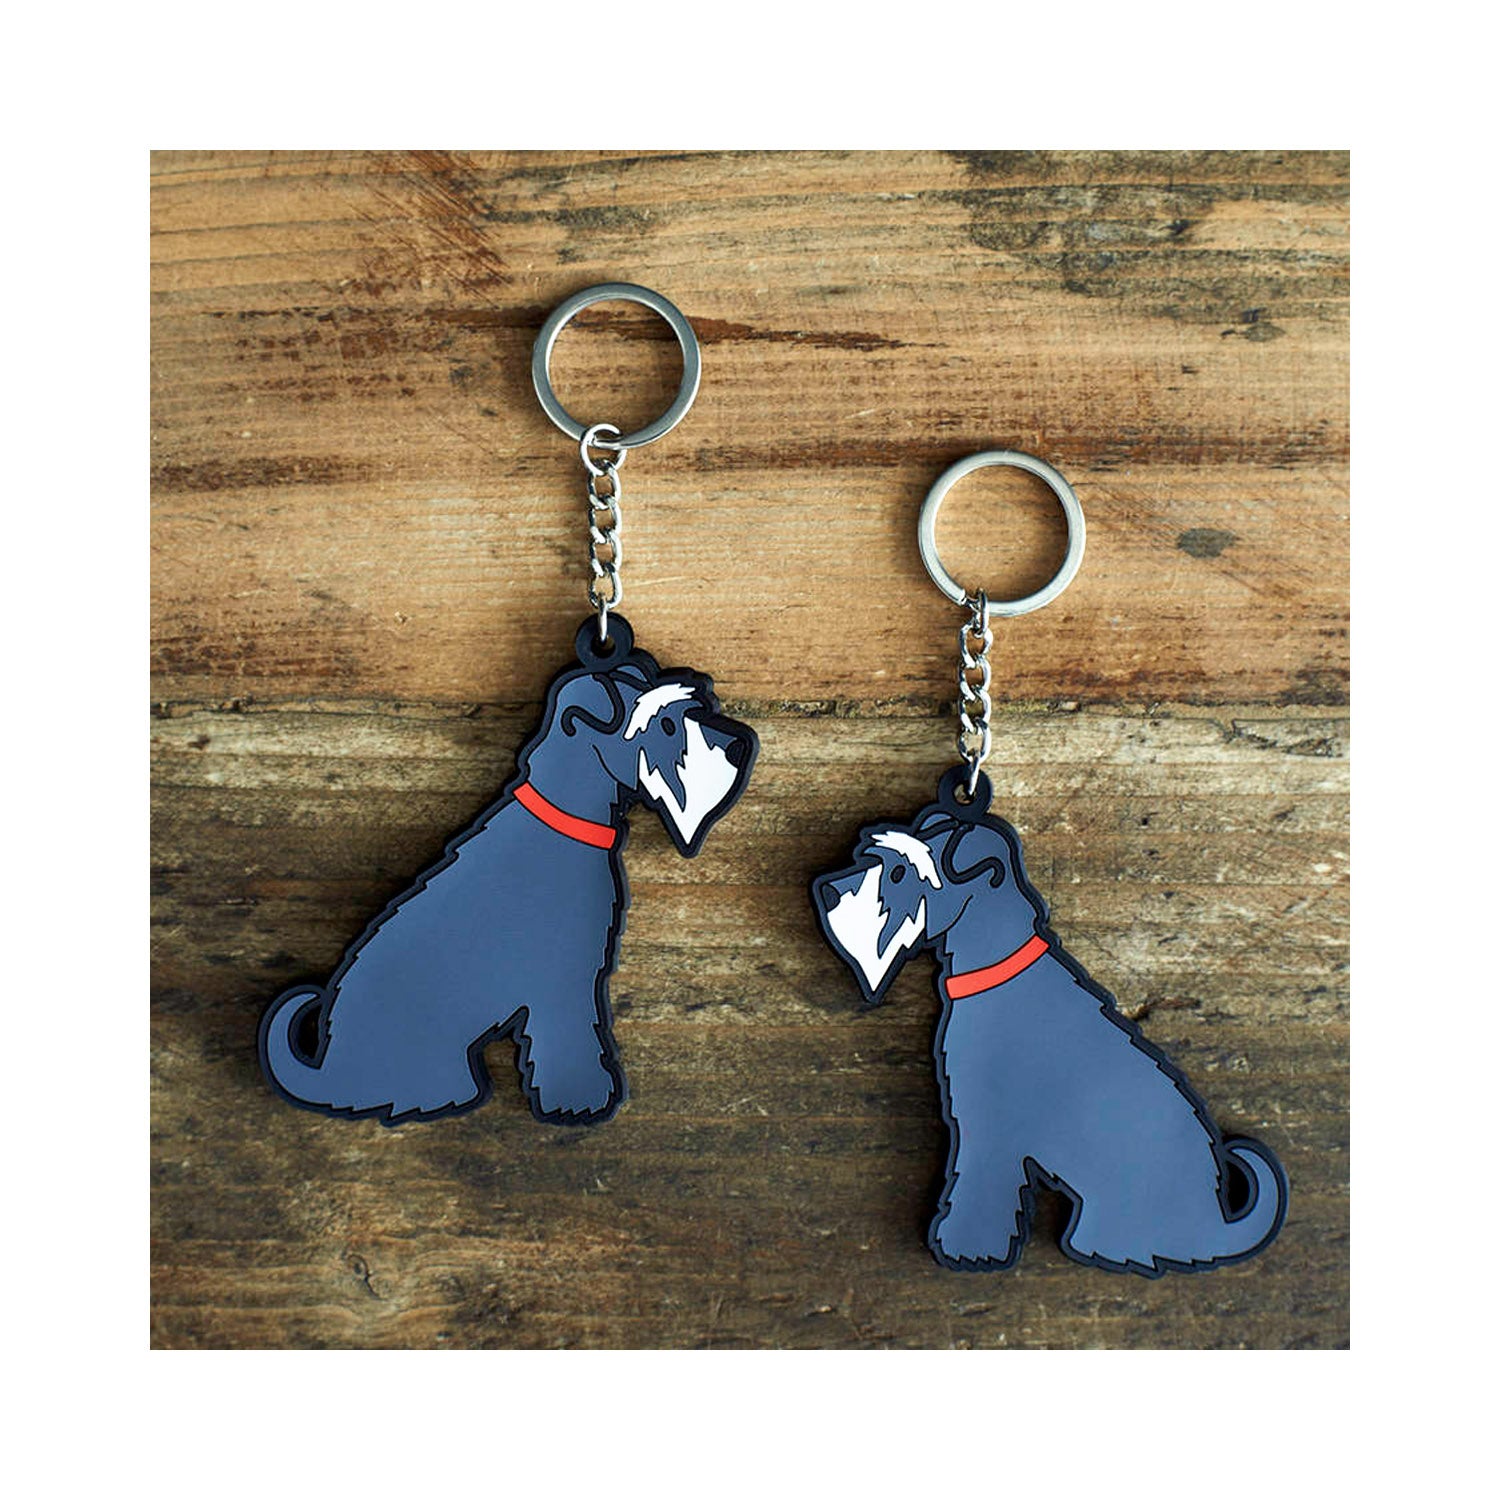 Dog Lover Gifts available at Dog Krazy Gifts - Eddie The Grey & White Schnauzer Keyring - part of the Sweet William range available from Dog Krazy Gifts